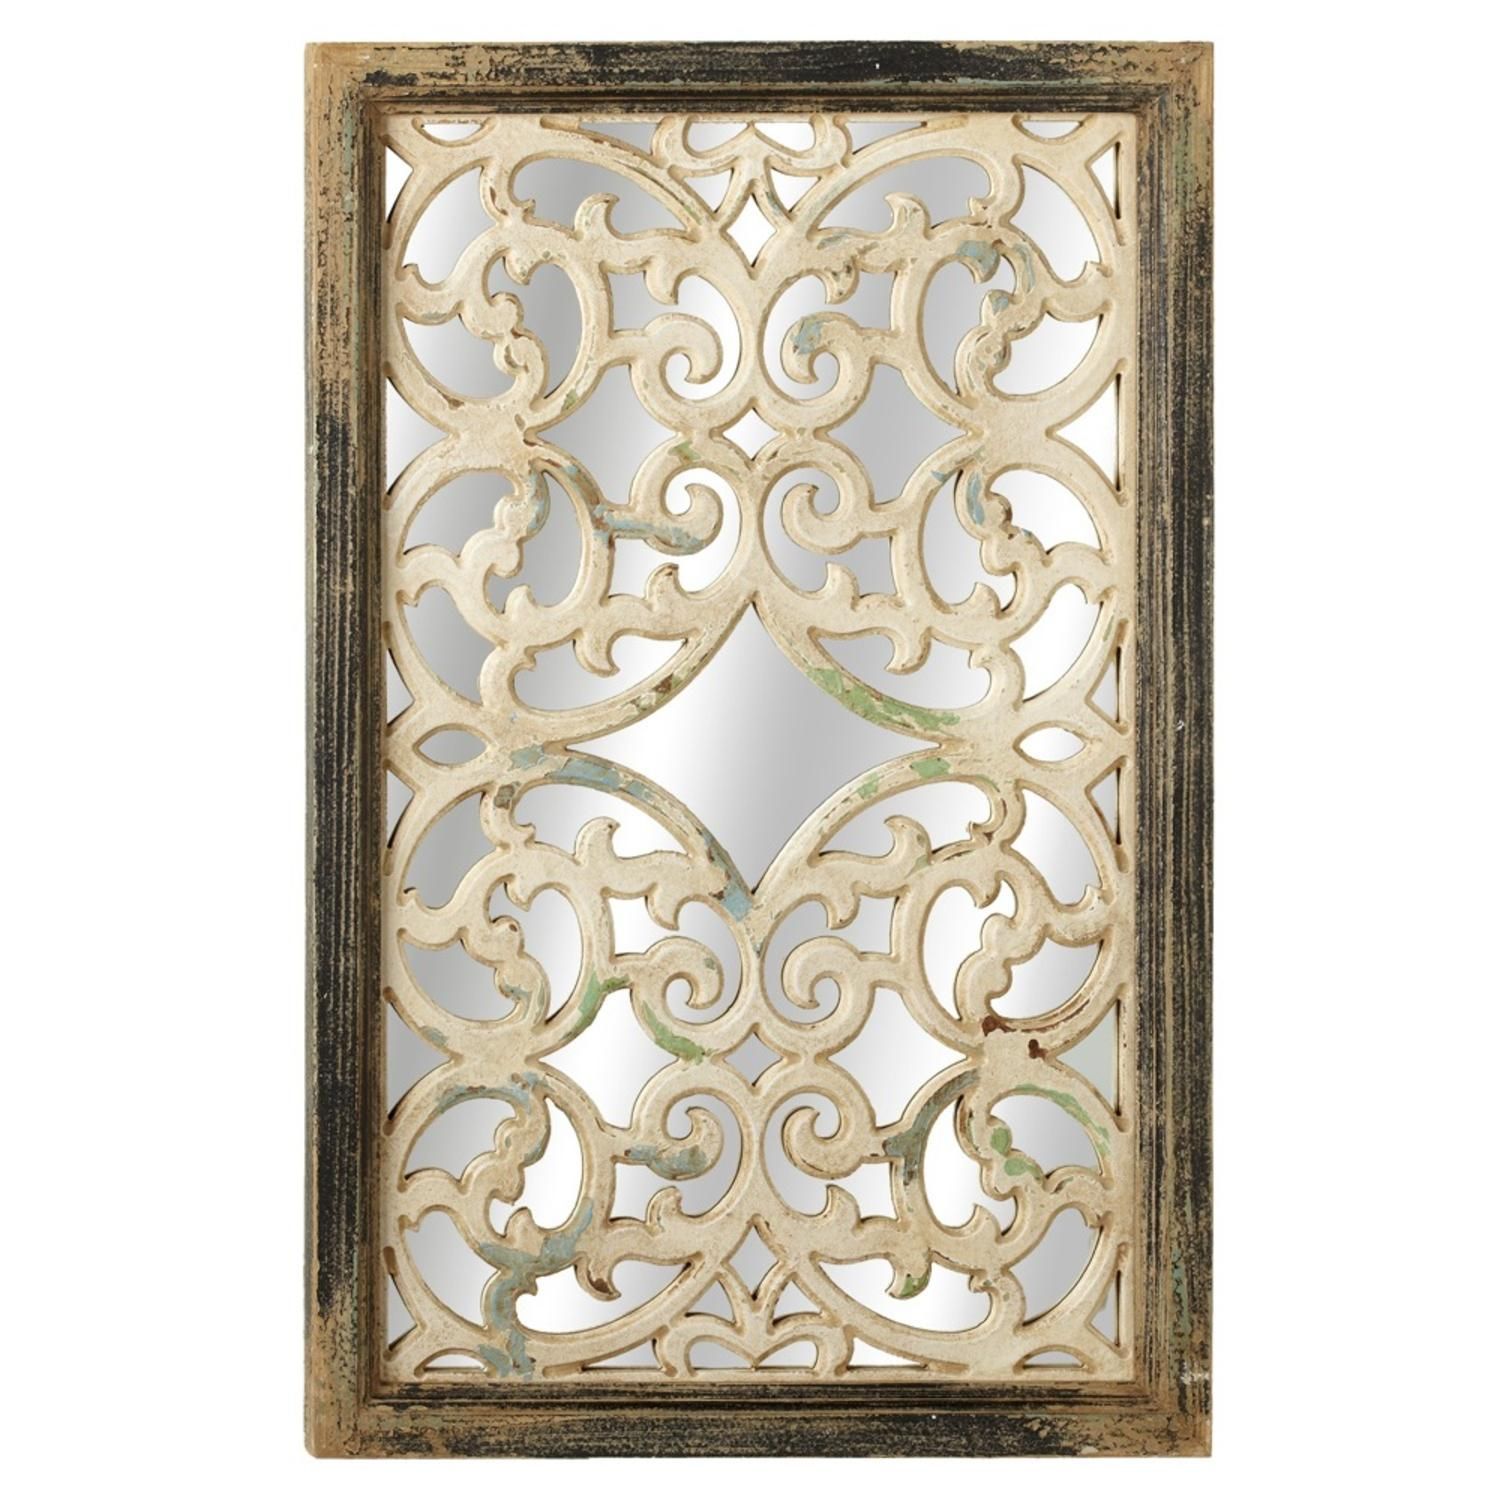 34" Black And White Scroll Inlaid Distressed Wooden Framed Wall Mirror Inside Black Wood Wall Mirrors (View 4 of 15)